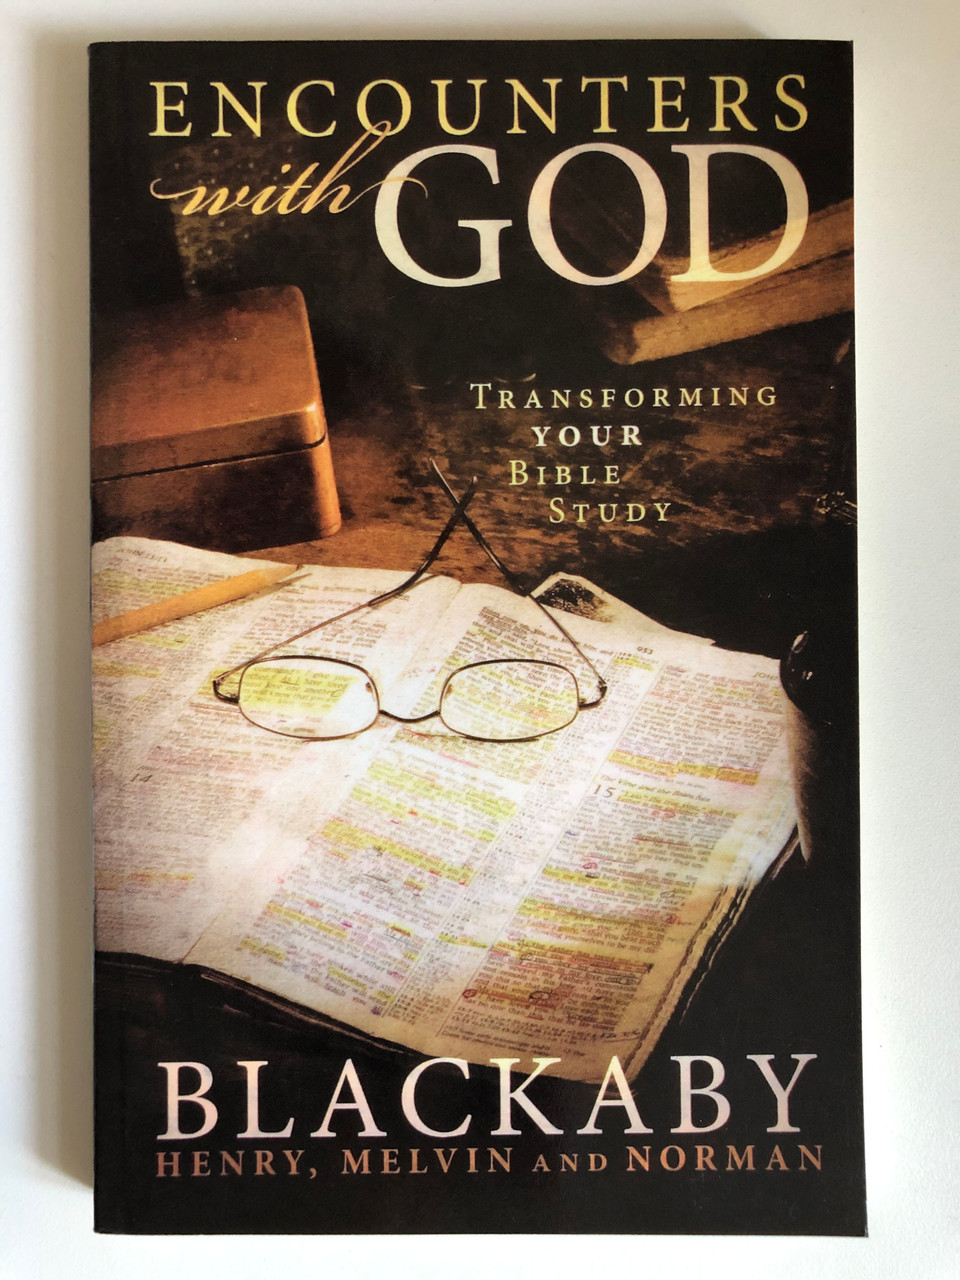 Encounters_with_God_Transforming_Your_Bible_Study_by_Henry_Blackaby_Norman_Blackaby_and_Mel_Blackaby_Experience_God_in_a_deeper_way_by_developing_how_you_read_and_study_3__72189.1691239698.1280.1280.JPG (960×1280)